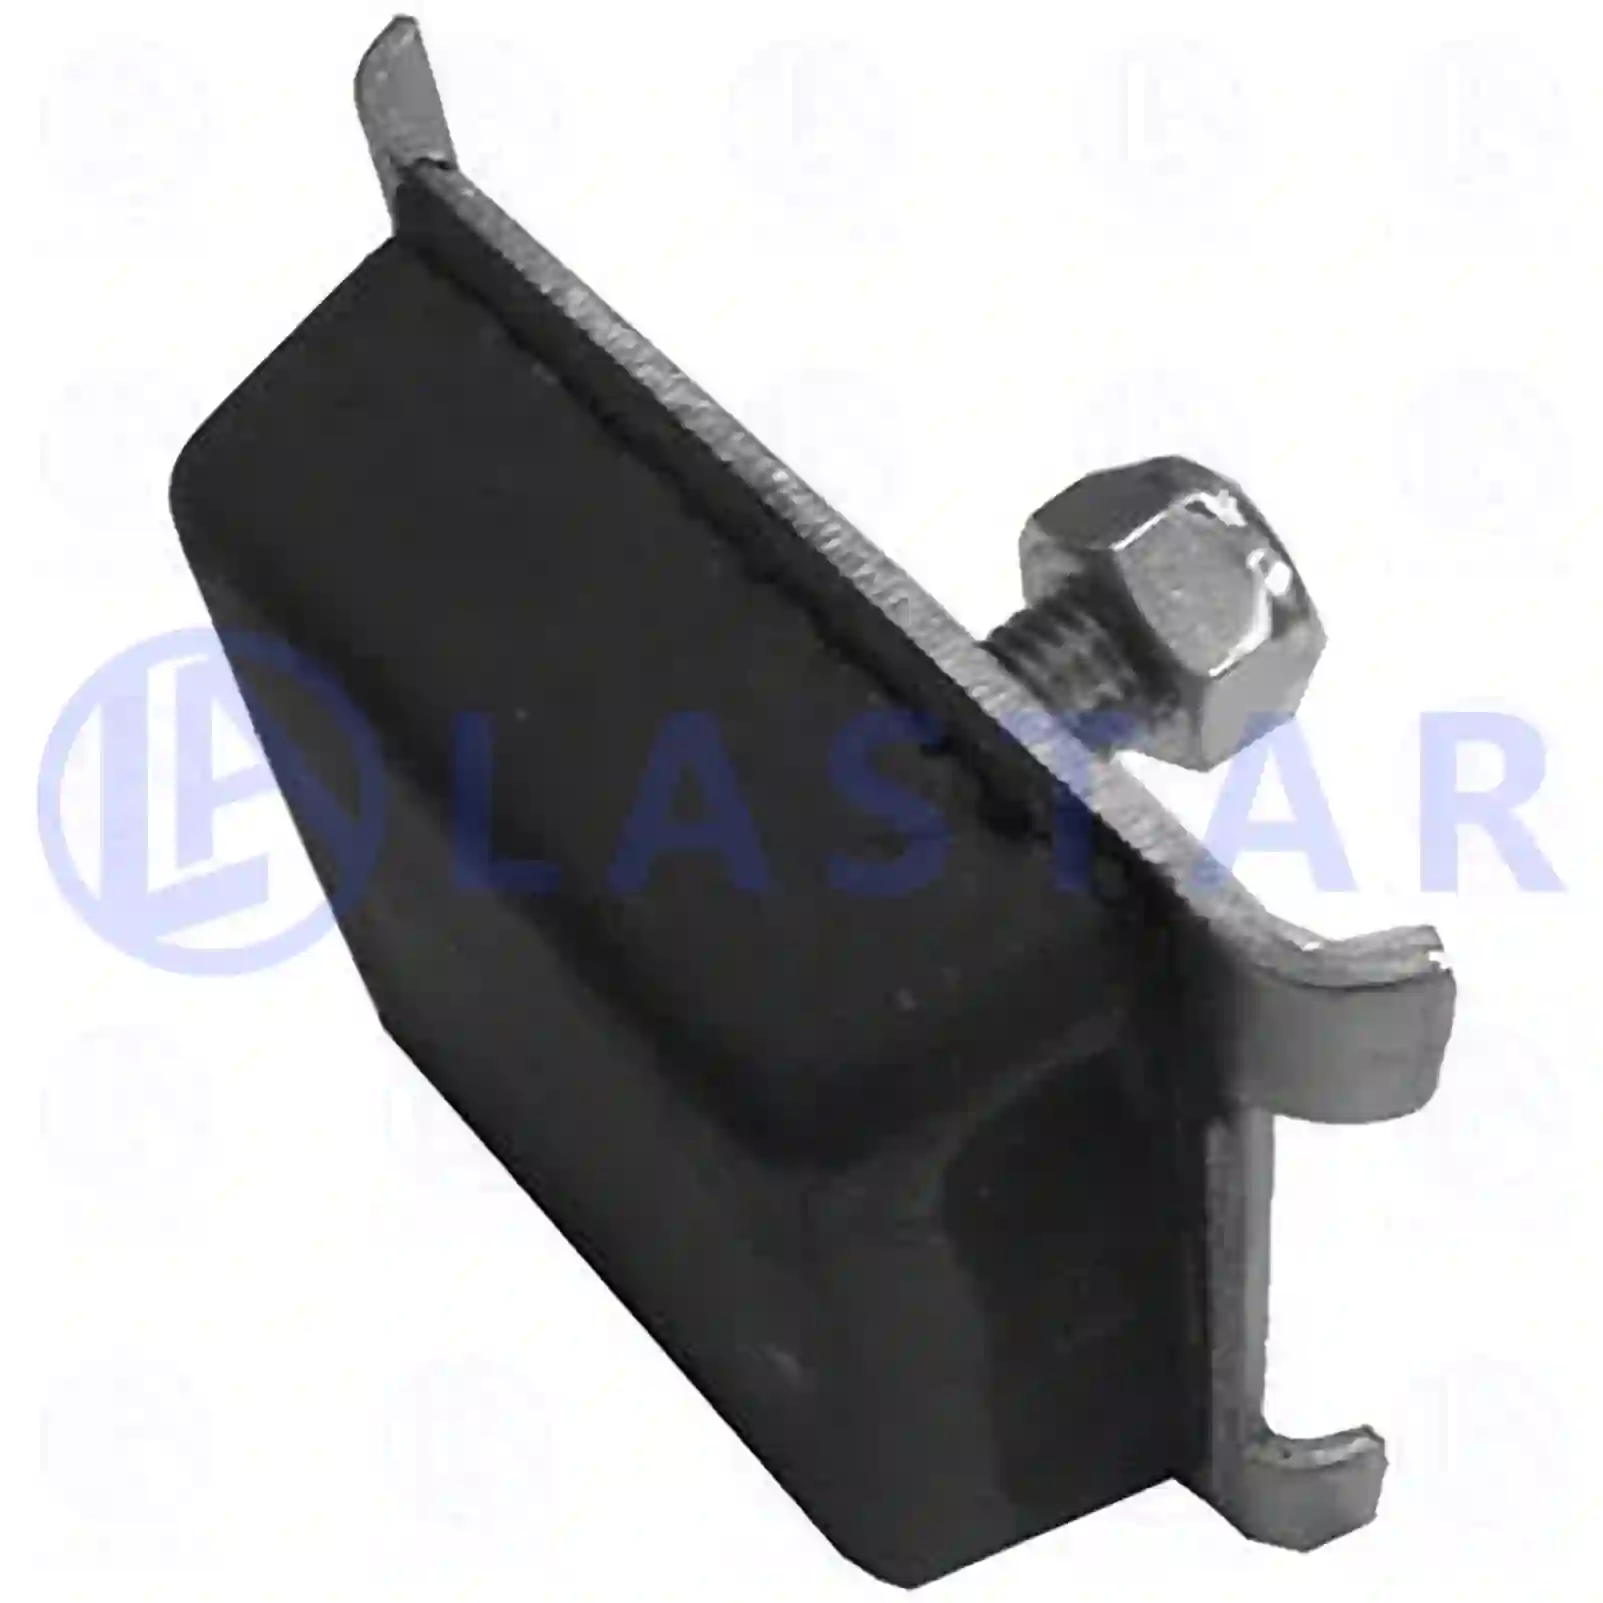 Buffer stop, 77729172, 98401286, ZG40882-0008 ||  77729172 Lastar Spare Part | Truck Spare Parts, Auotomotive Spare Parts Buffer stop, 77729172, 98401286, ZG40882-0008 ||  77729172 Lastar Spare Part | Truck Spare Parts, Auotomotive Spare Parts